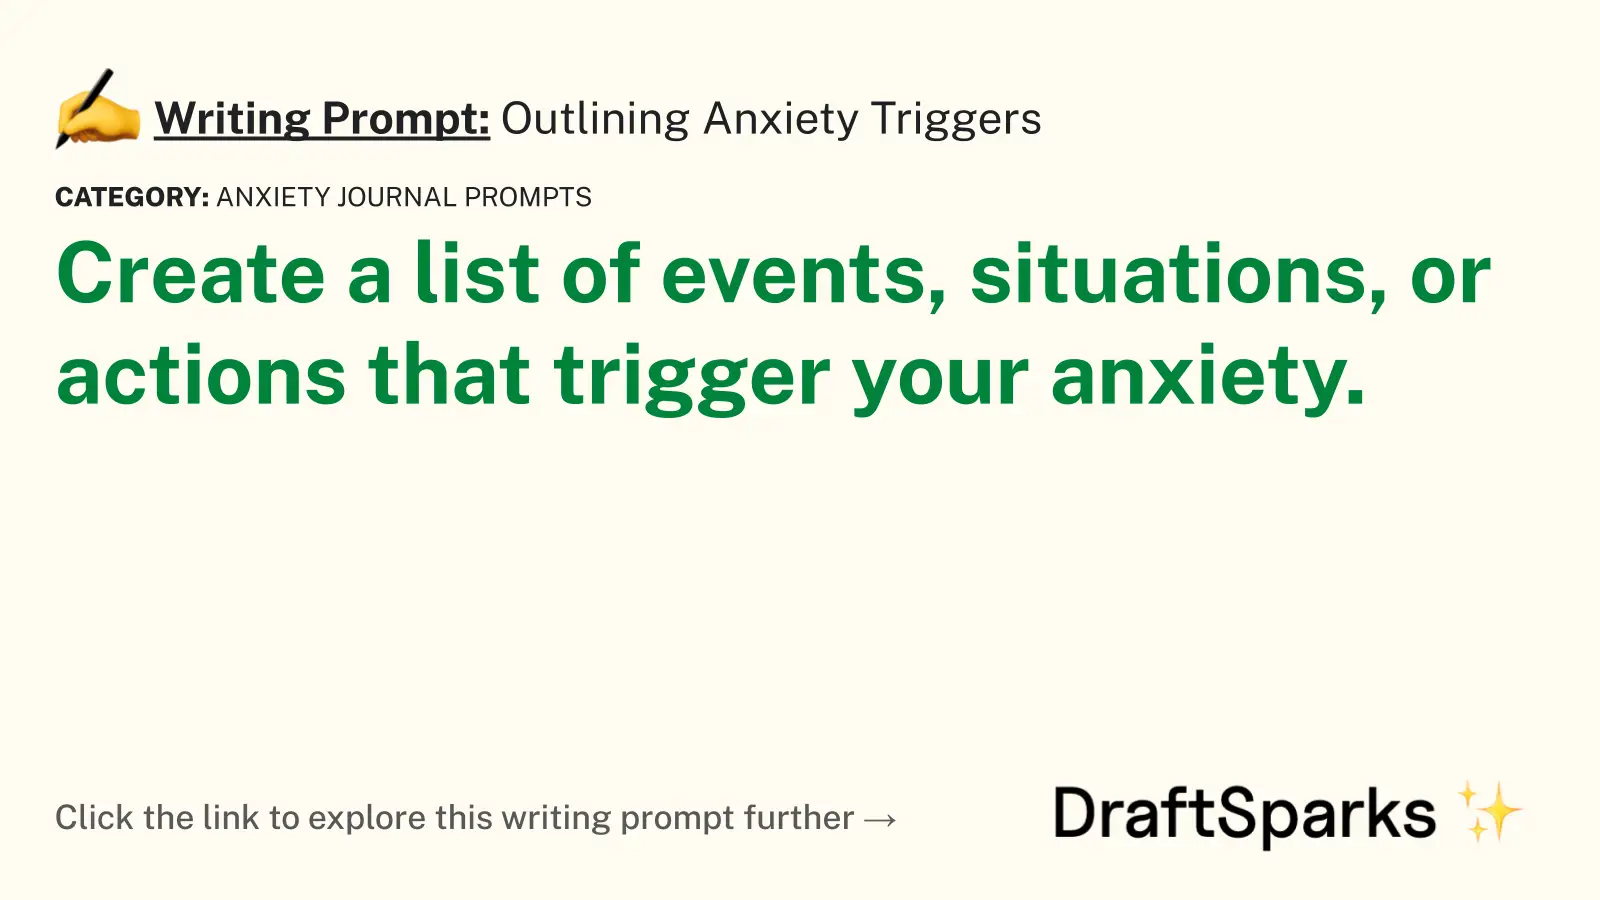 Outlining Anxiety Triggers